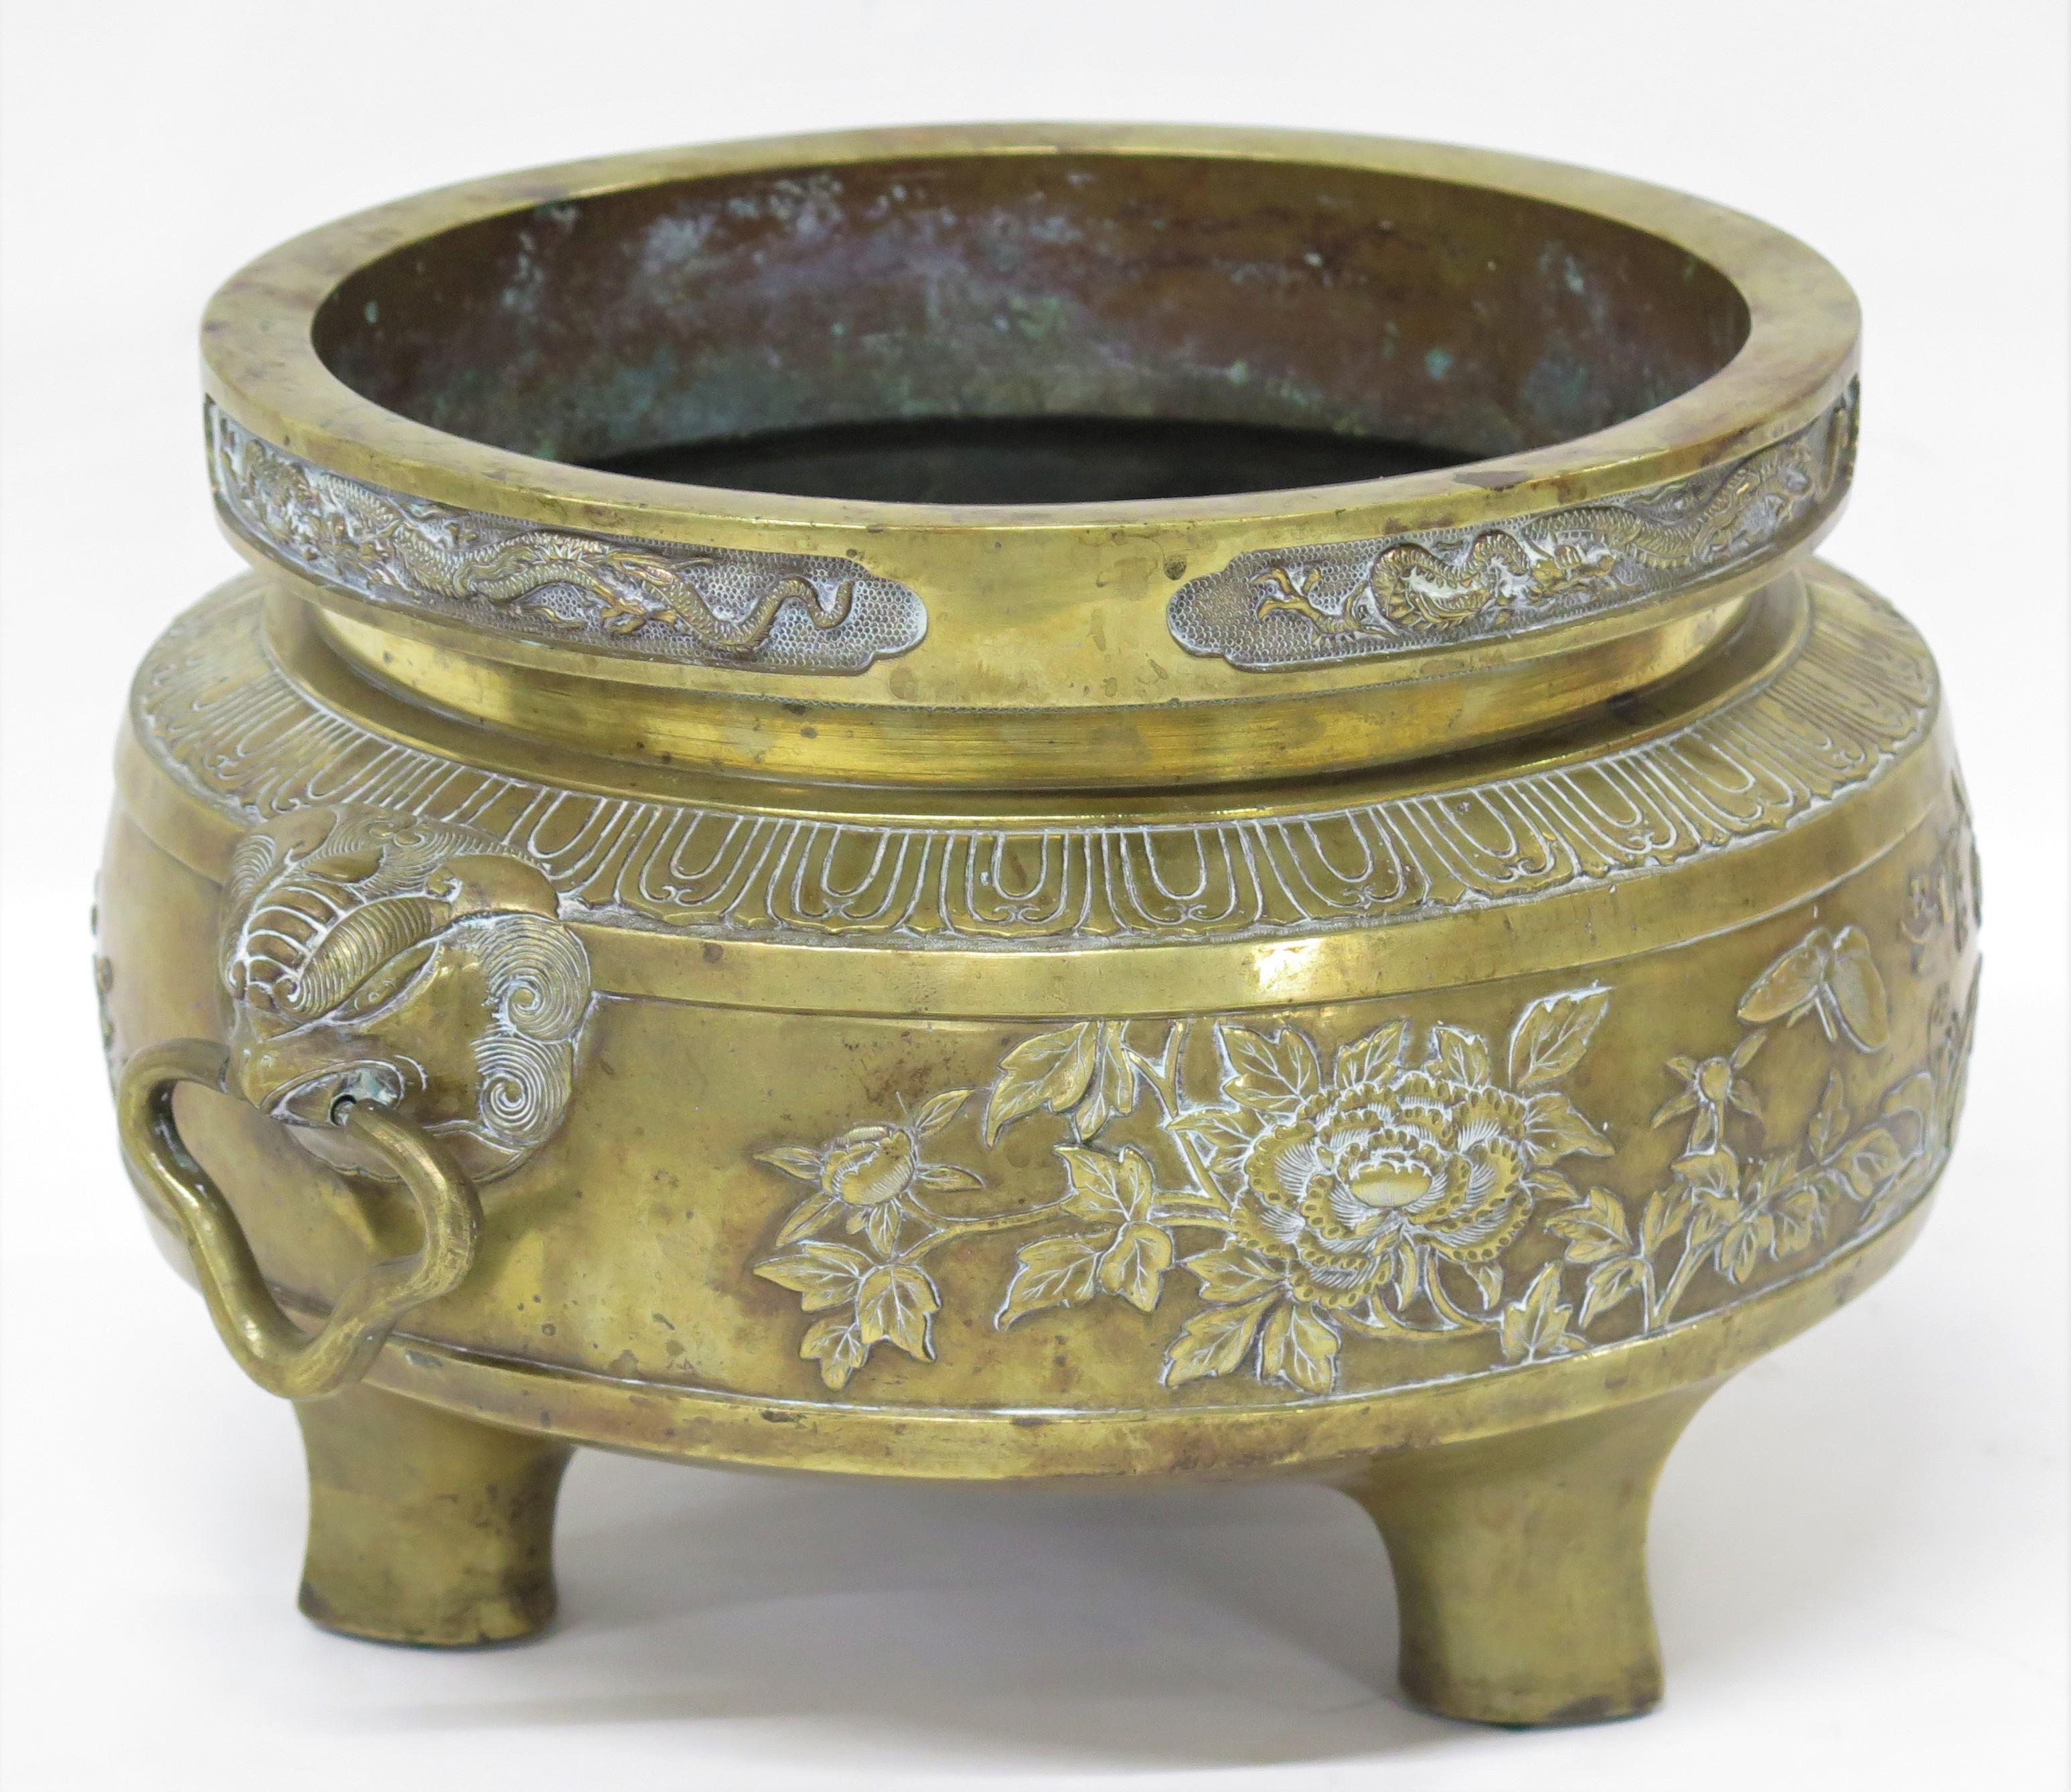 Chinoiserie A Large Brass Container with Three Feet